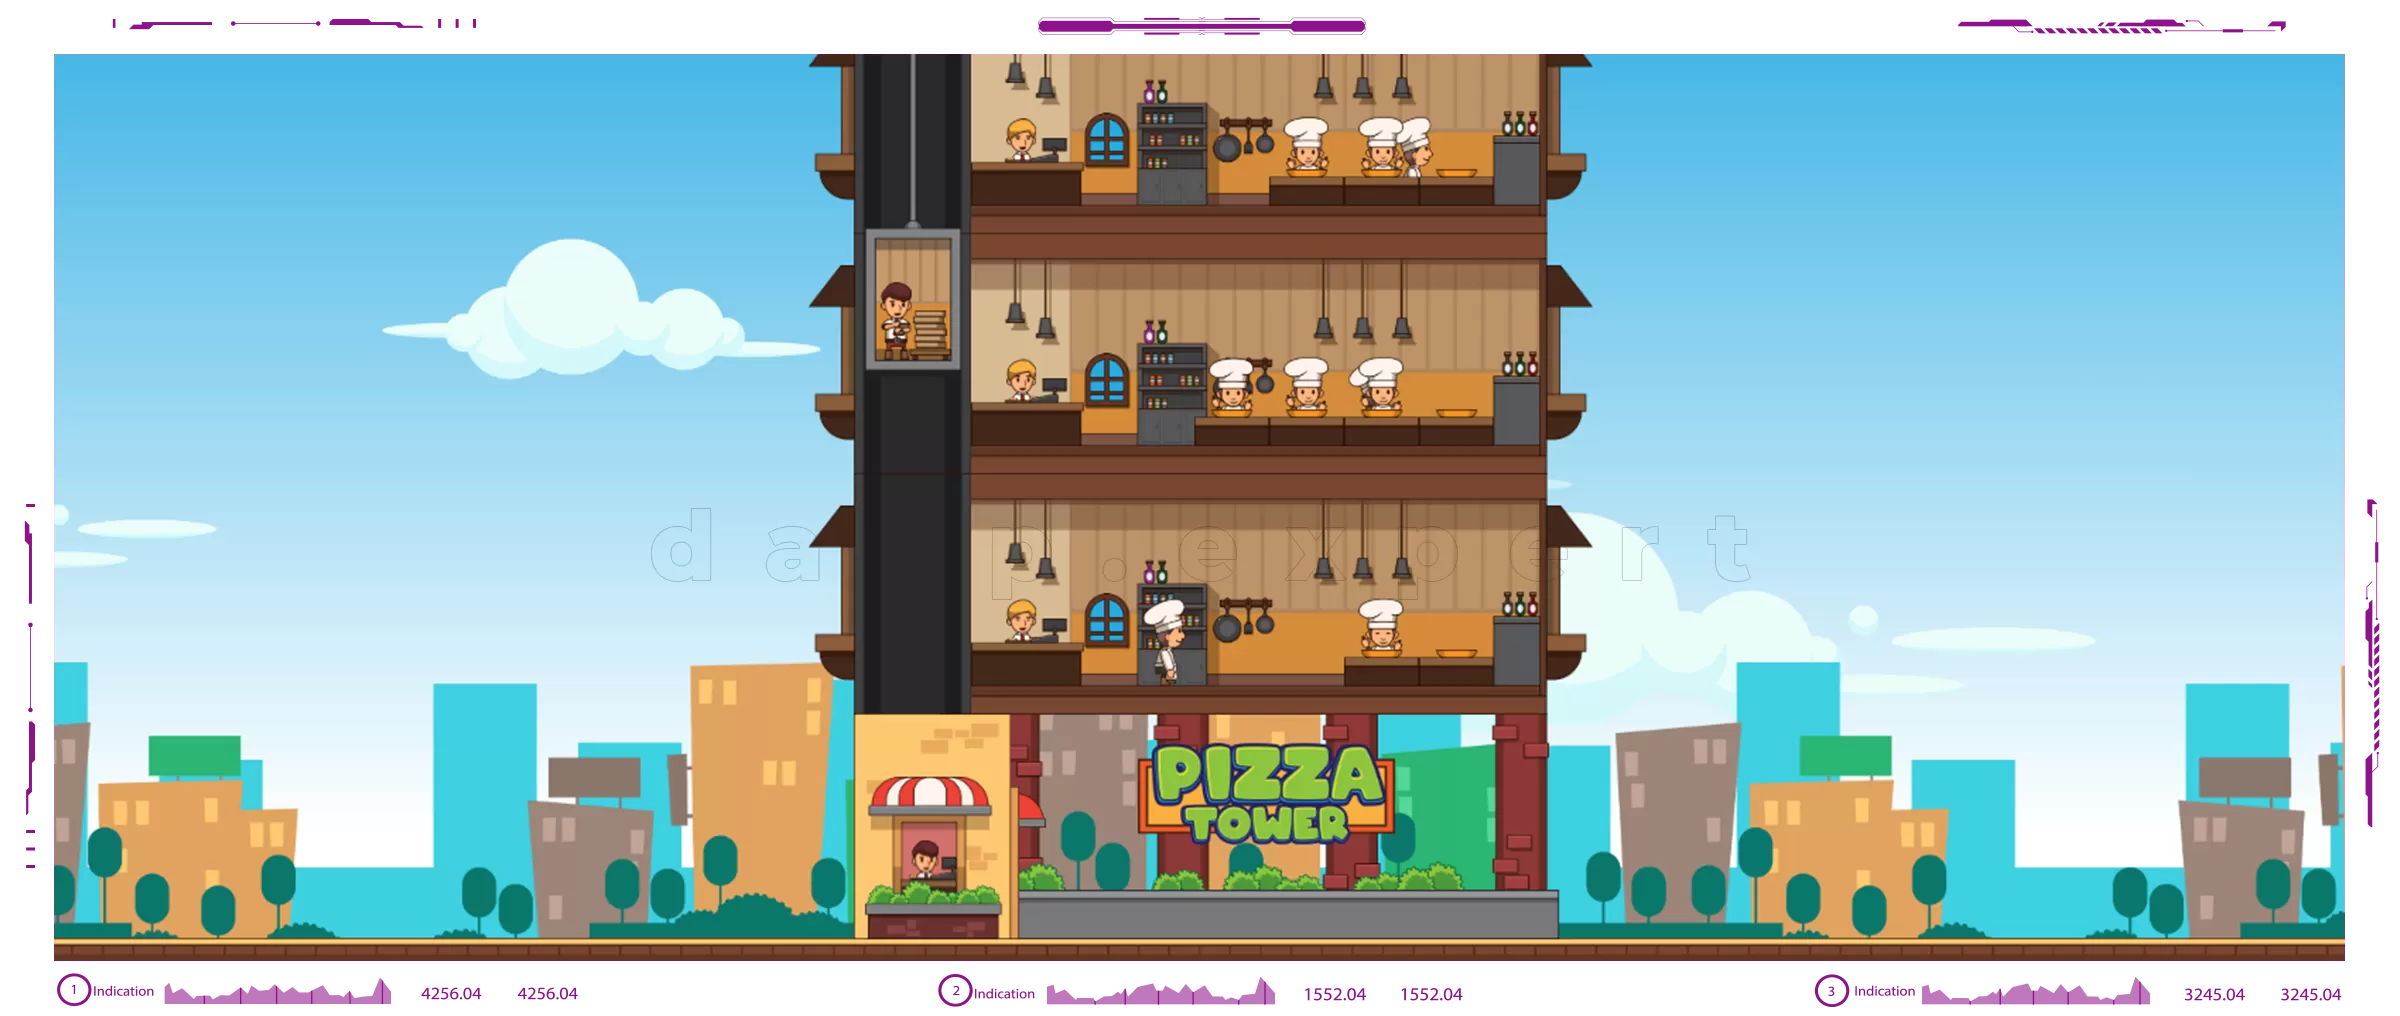 Using pizza tower online, I make a web port of pizza tower using